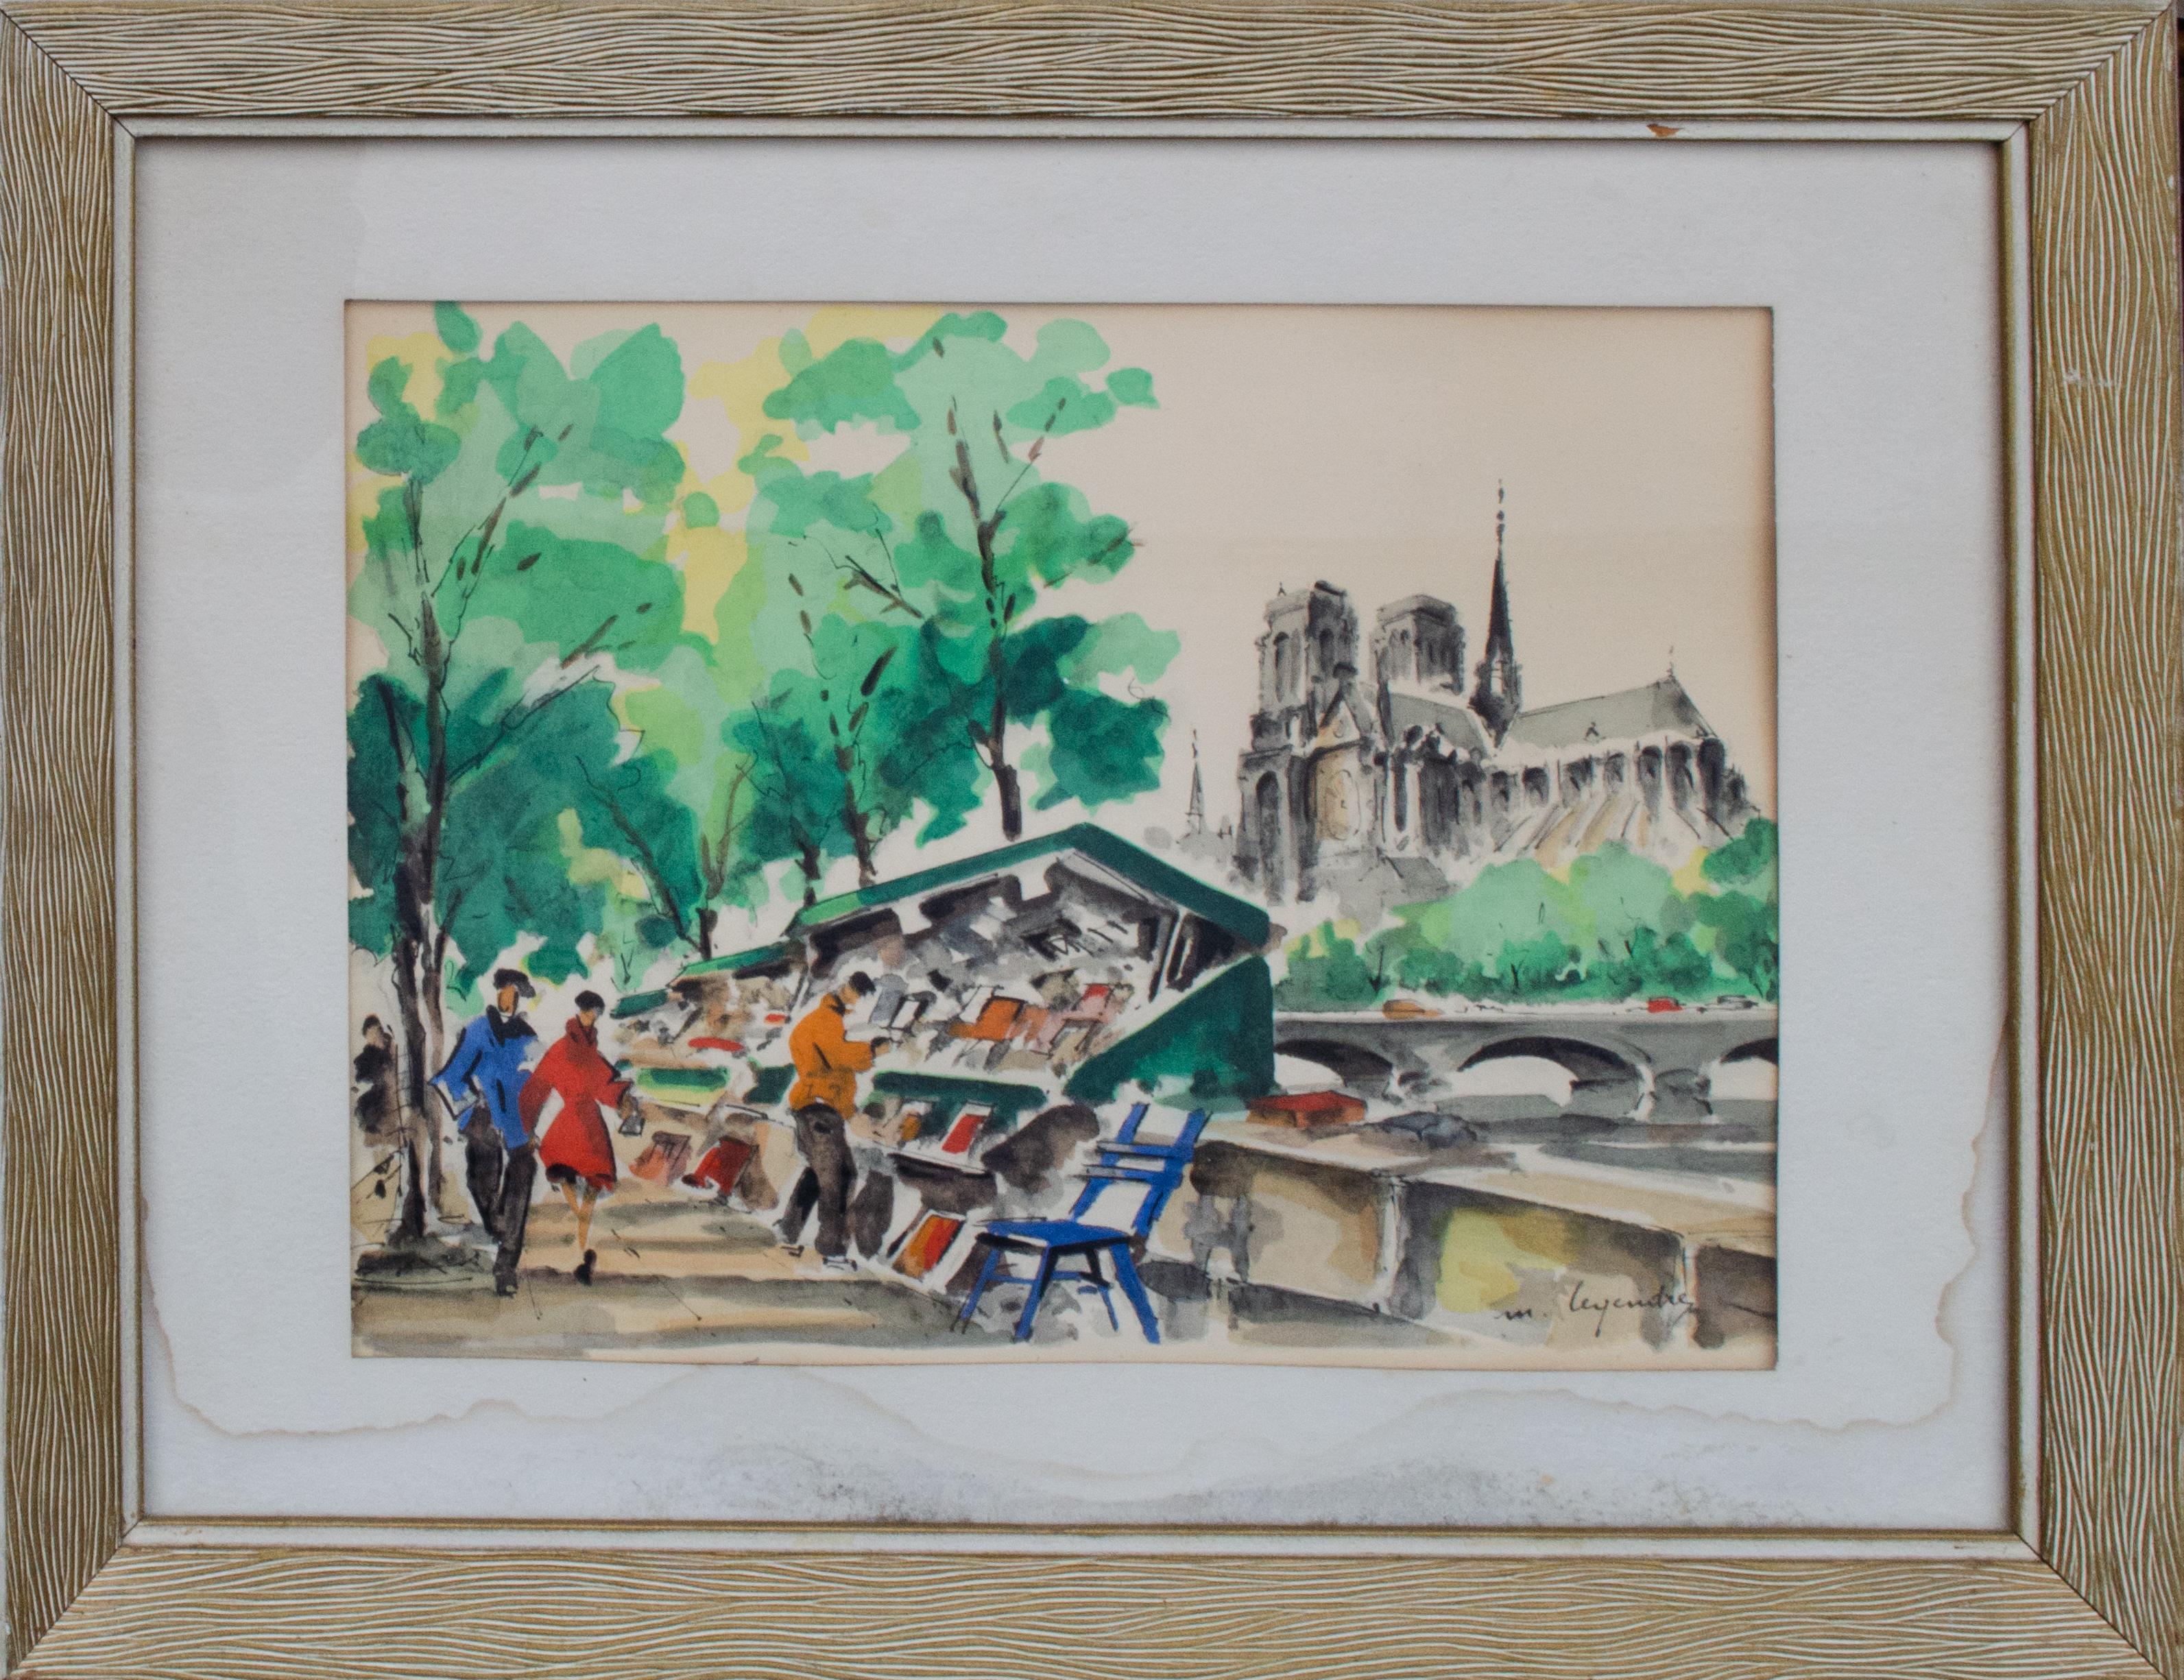 Maurice Legendre 
Untitled (Notre Dame), Early 20th Century
Watercolor on paper
Sight: 9 x 12 in.
Framed: 14 1/4 x 18 x 1 in.
Signed lower left: M. Legendre

Maurice Legendre was a noted French impressionist and sculptor, especially known for his